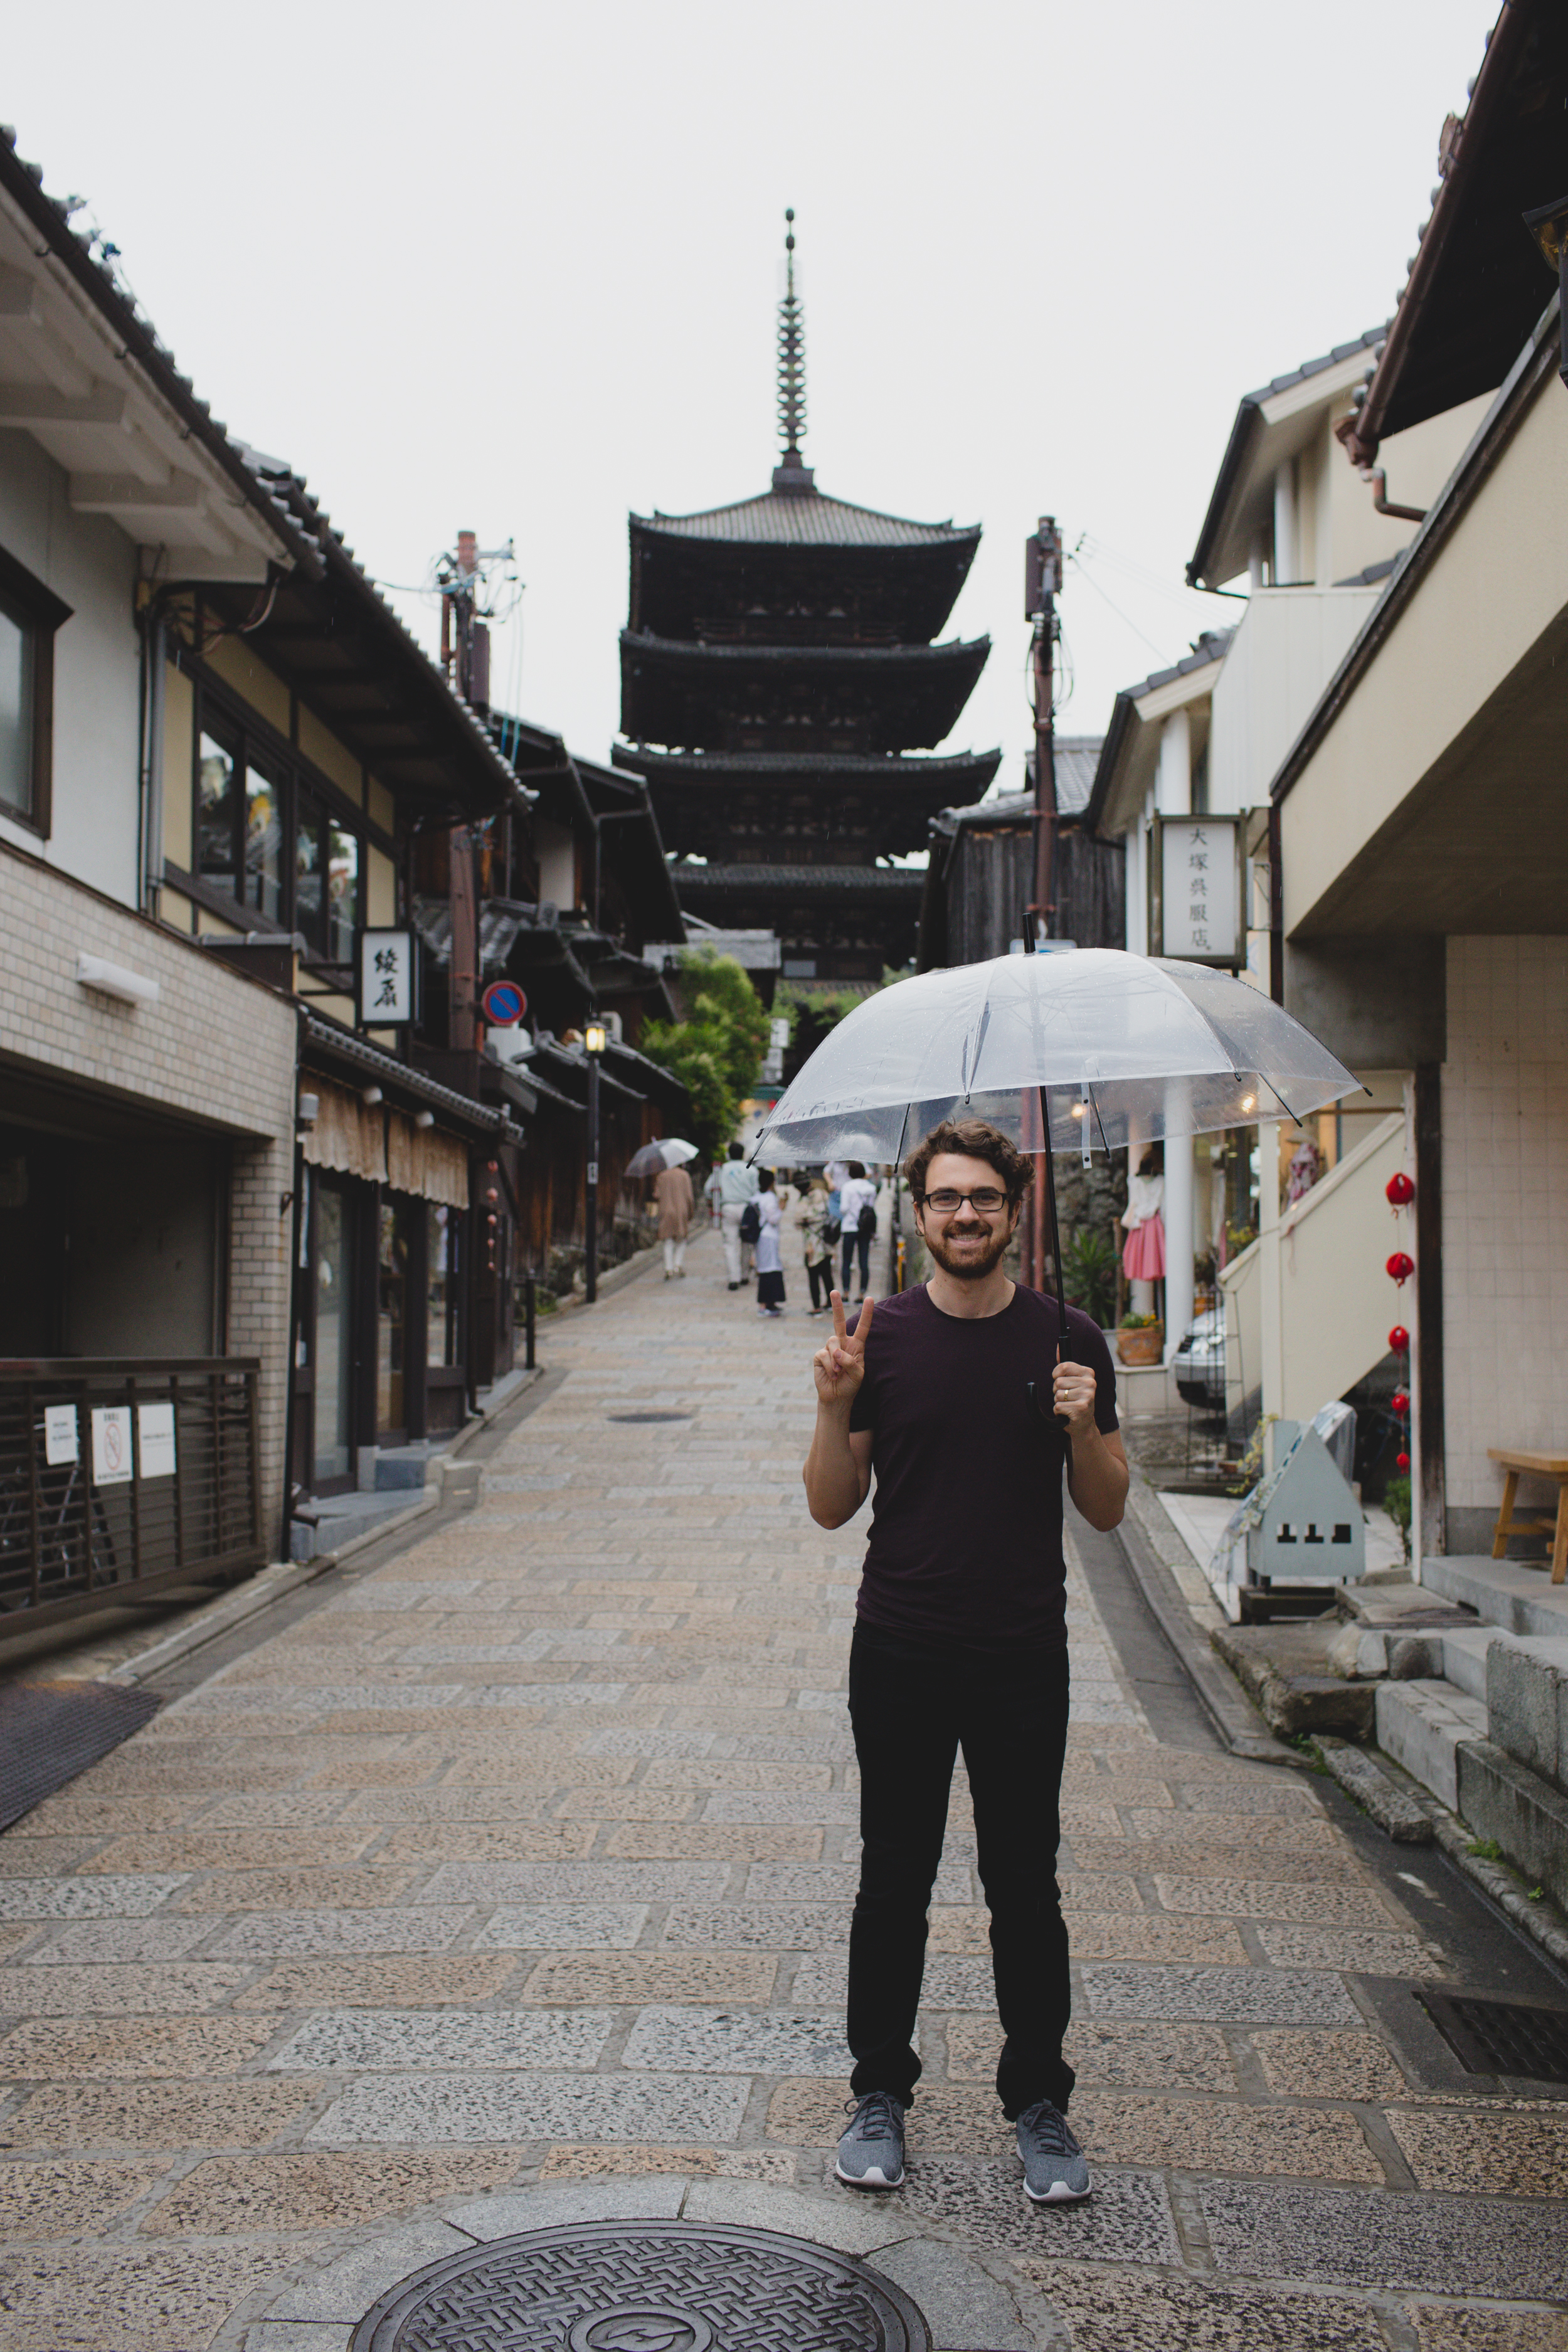  First day in Kyoto! We stayed in Gion, the geisha district. There were so many ‘instagram photoshoots’ in this area! (Clearly Andrew’s photo went viral :P) 